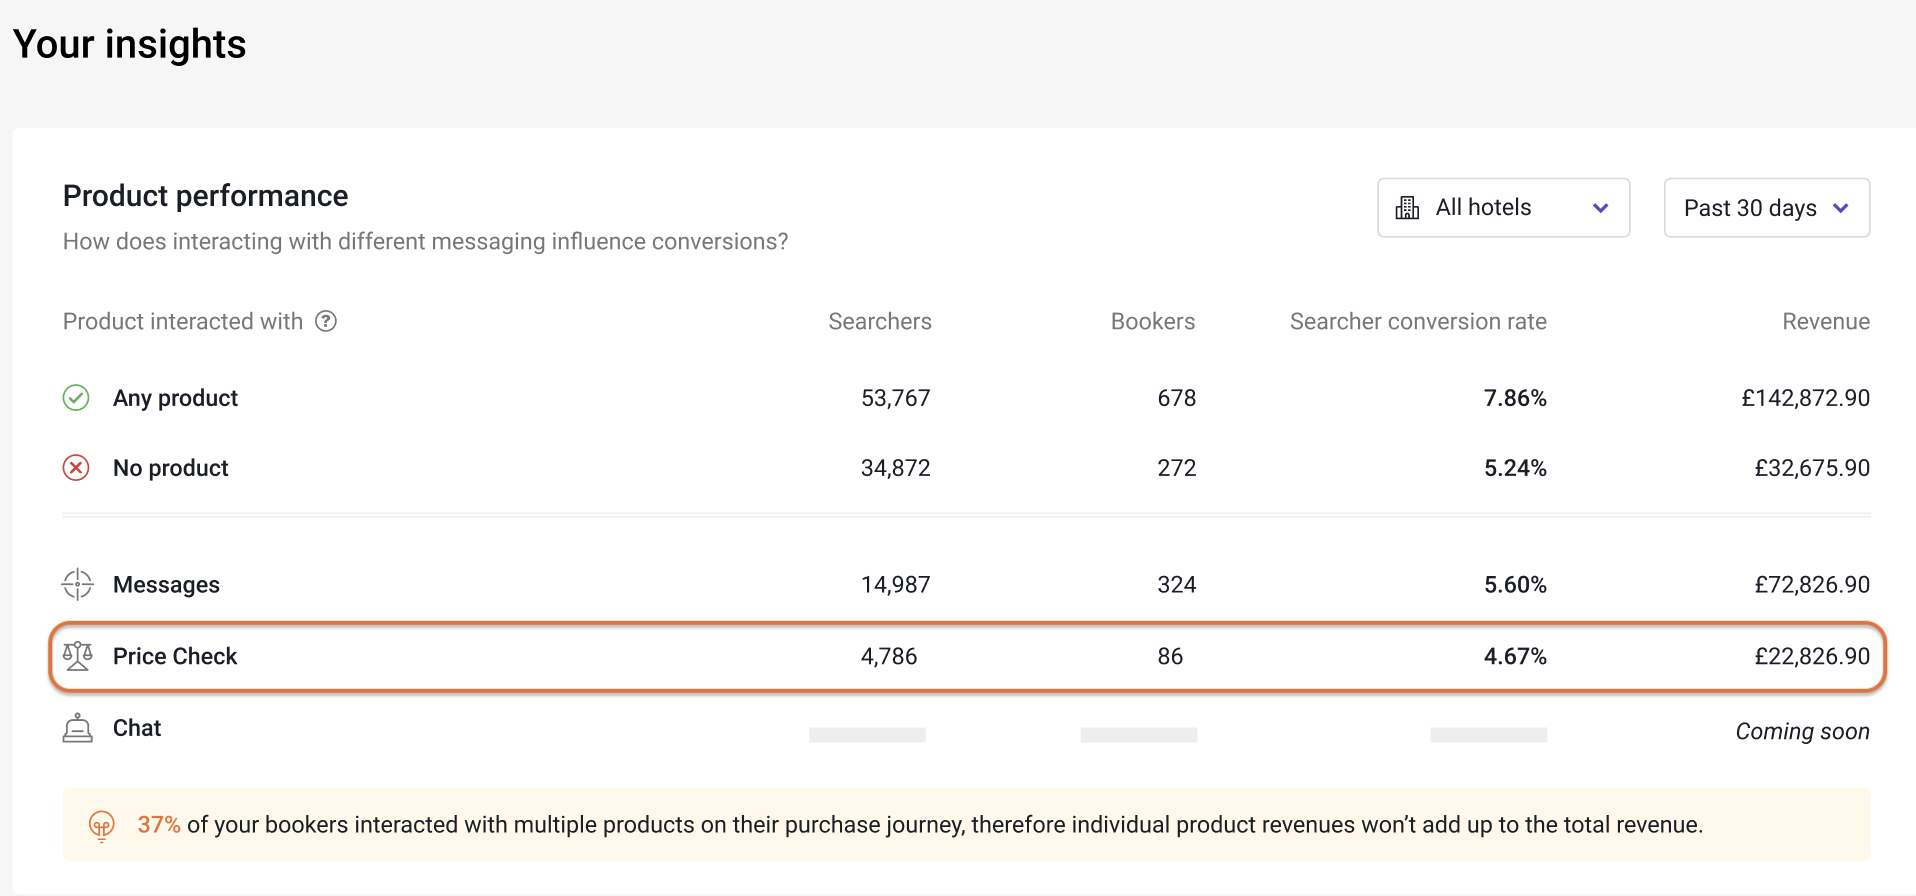 A screenshot of the Triptease Platform showing the 'Product performance' section of the Triptease Insights page